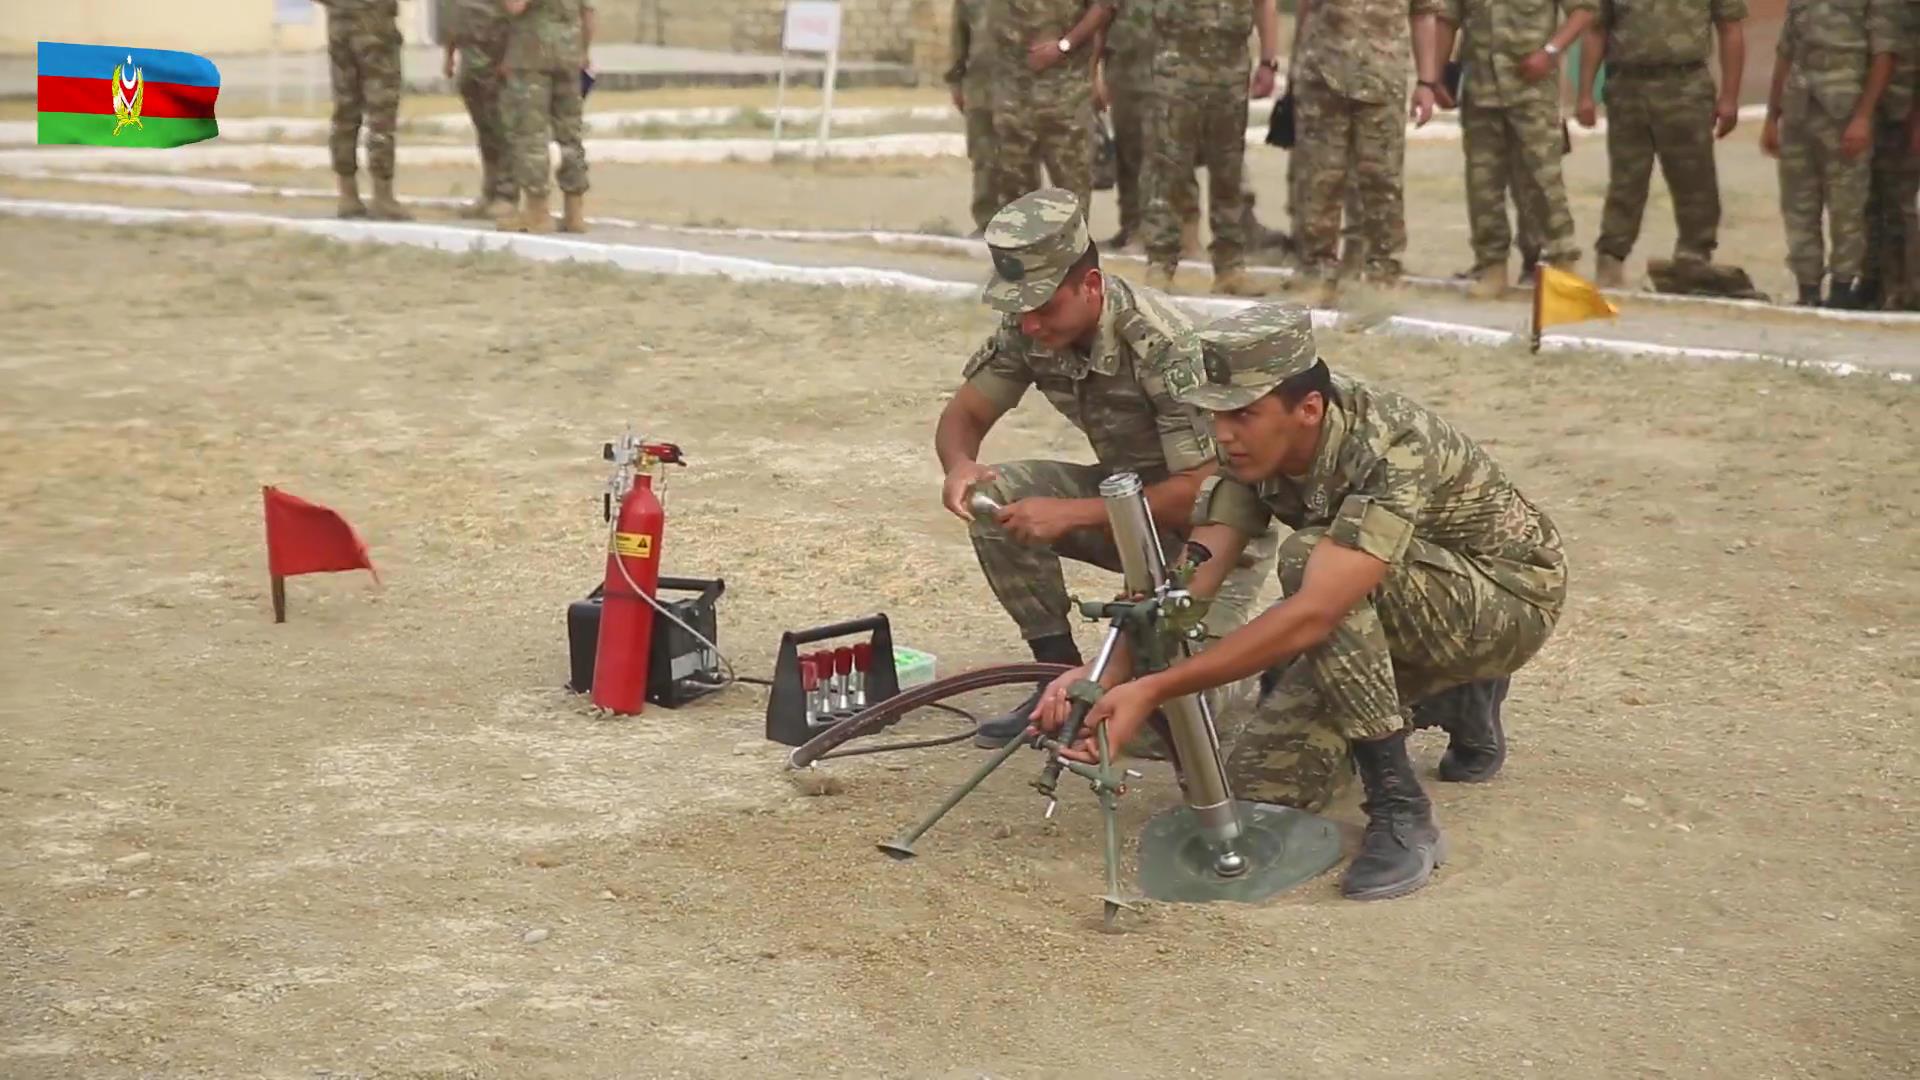 Azerbaijan Army operator converted its 60mm mortar into simulator by replacing the barrel and retaining all the other mortar parts.